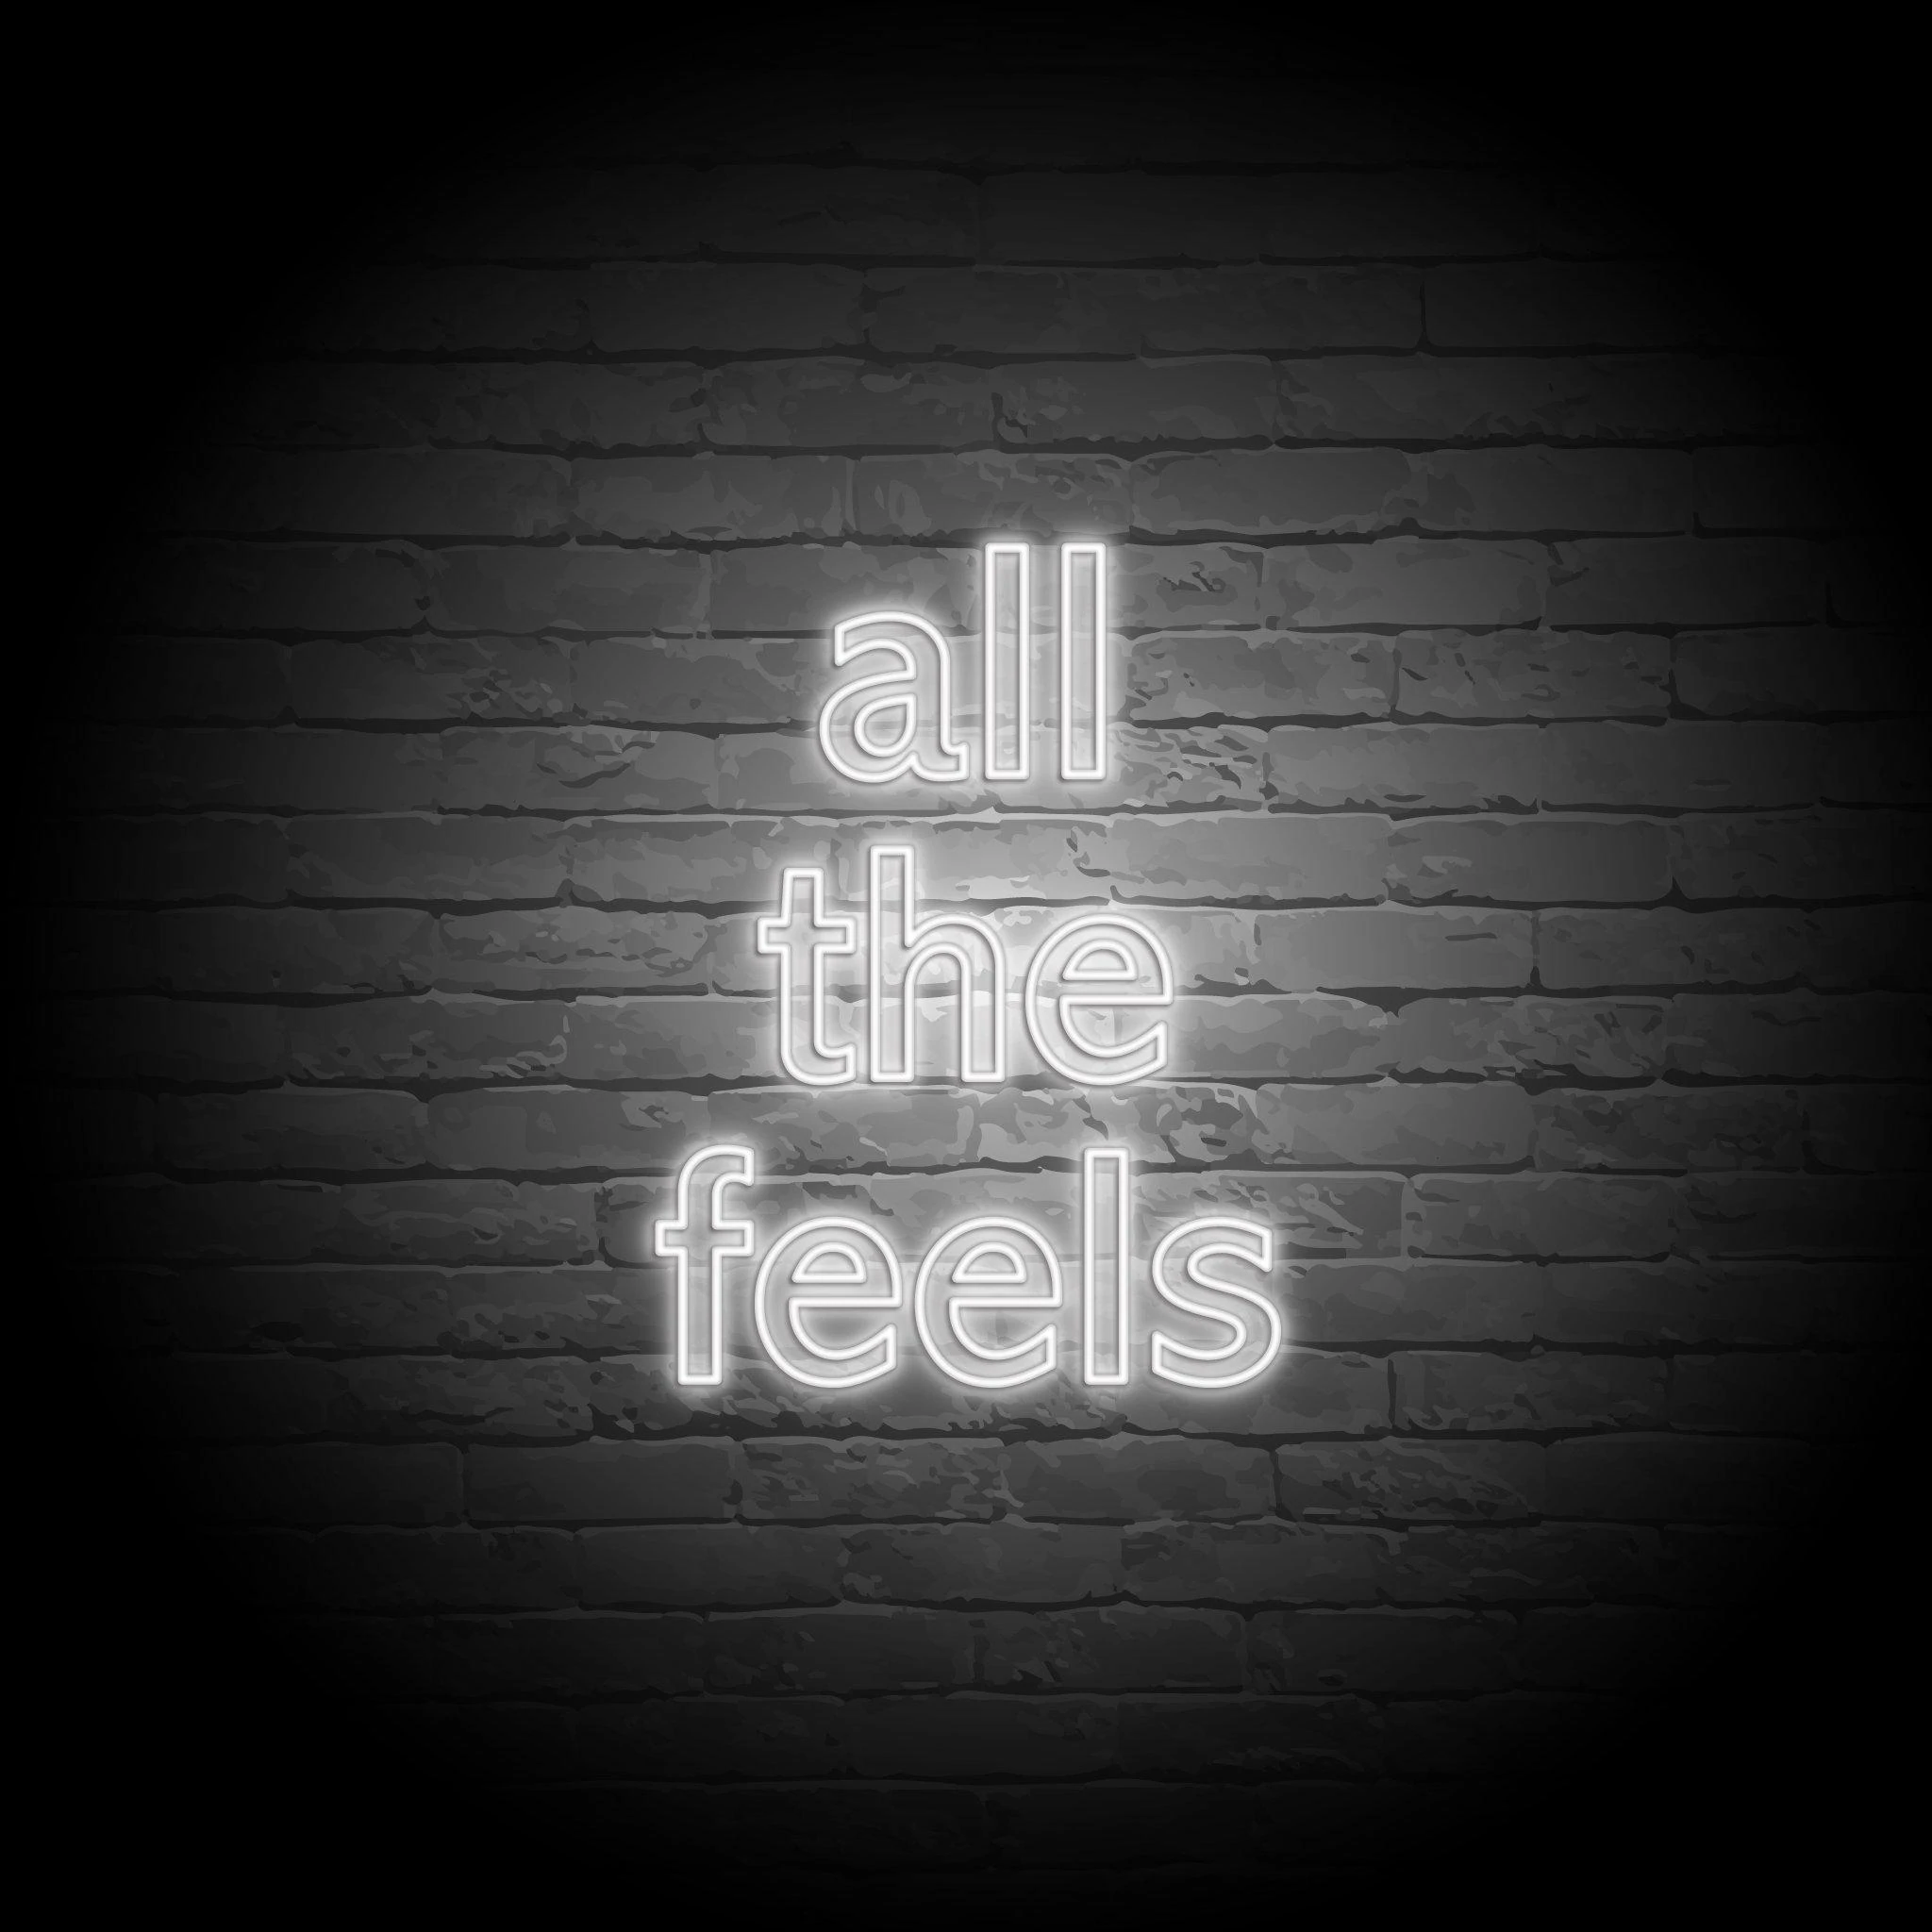 'ALL THE FEELS' NEON SIGN